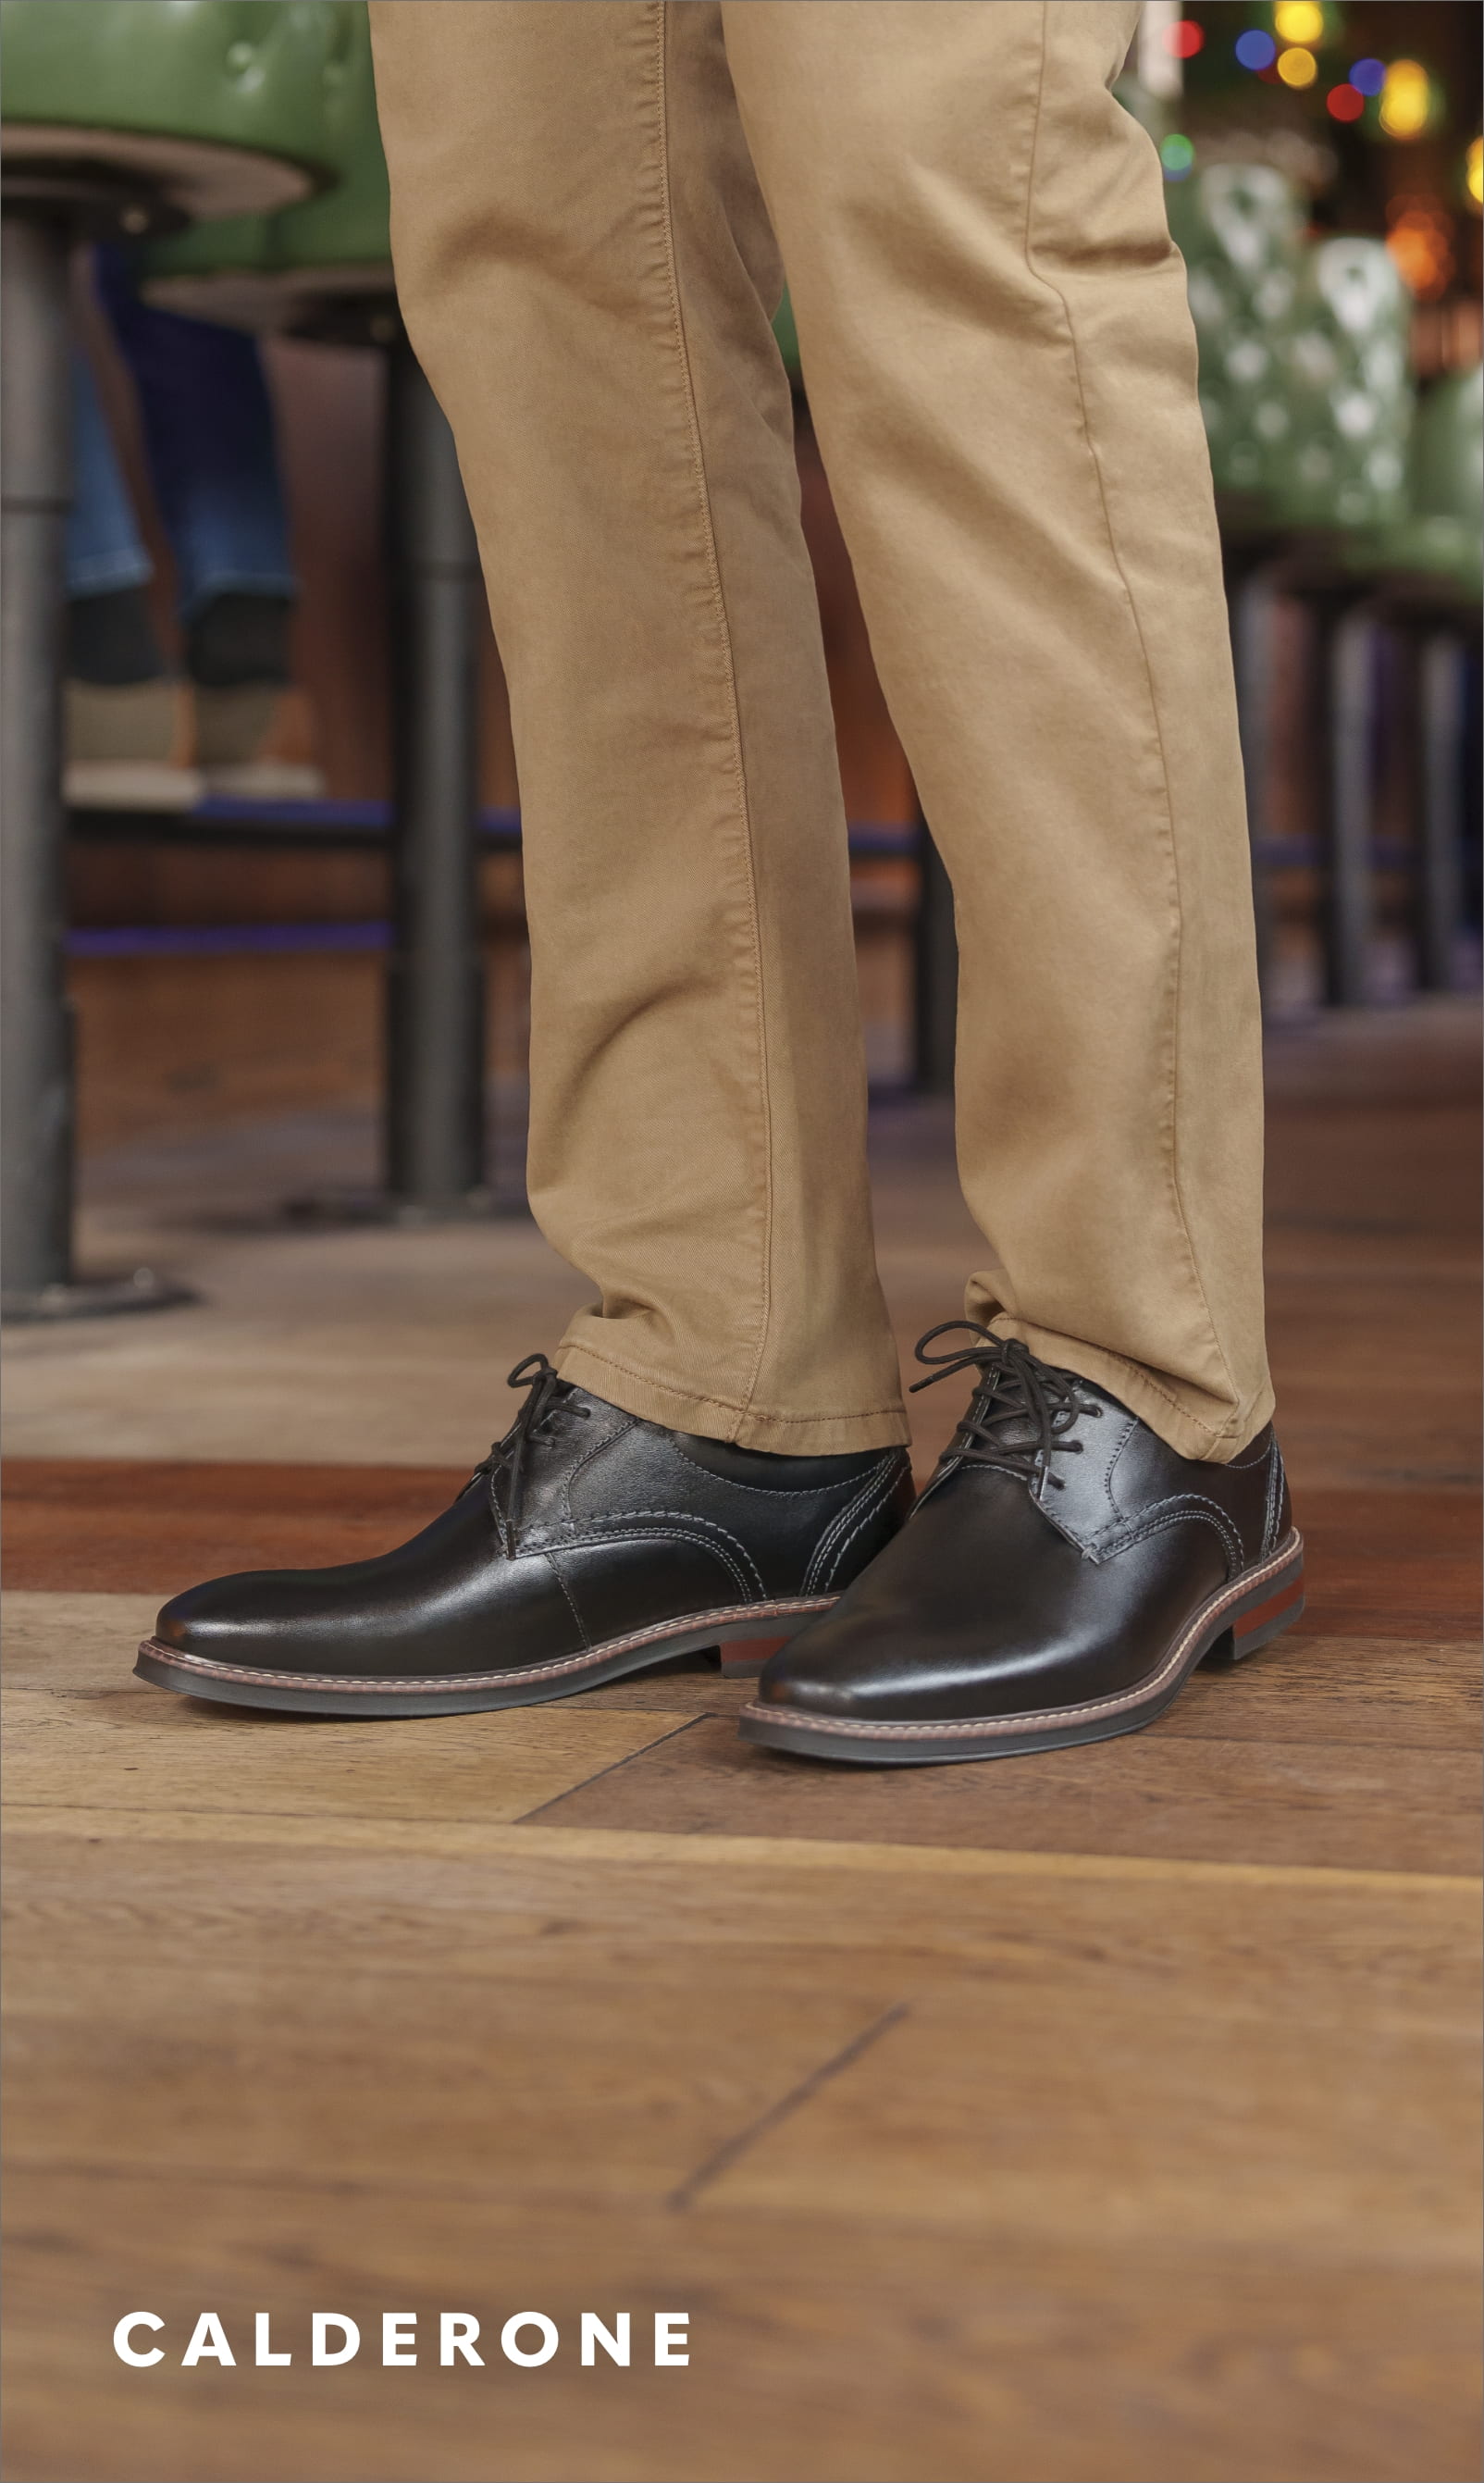 Men's Dress Shoes category. Image features the Calderone plain toe oxford in black.